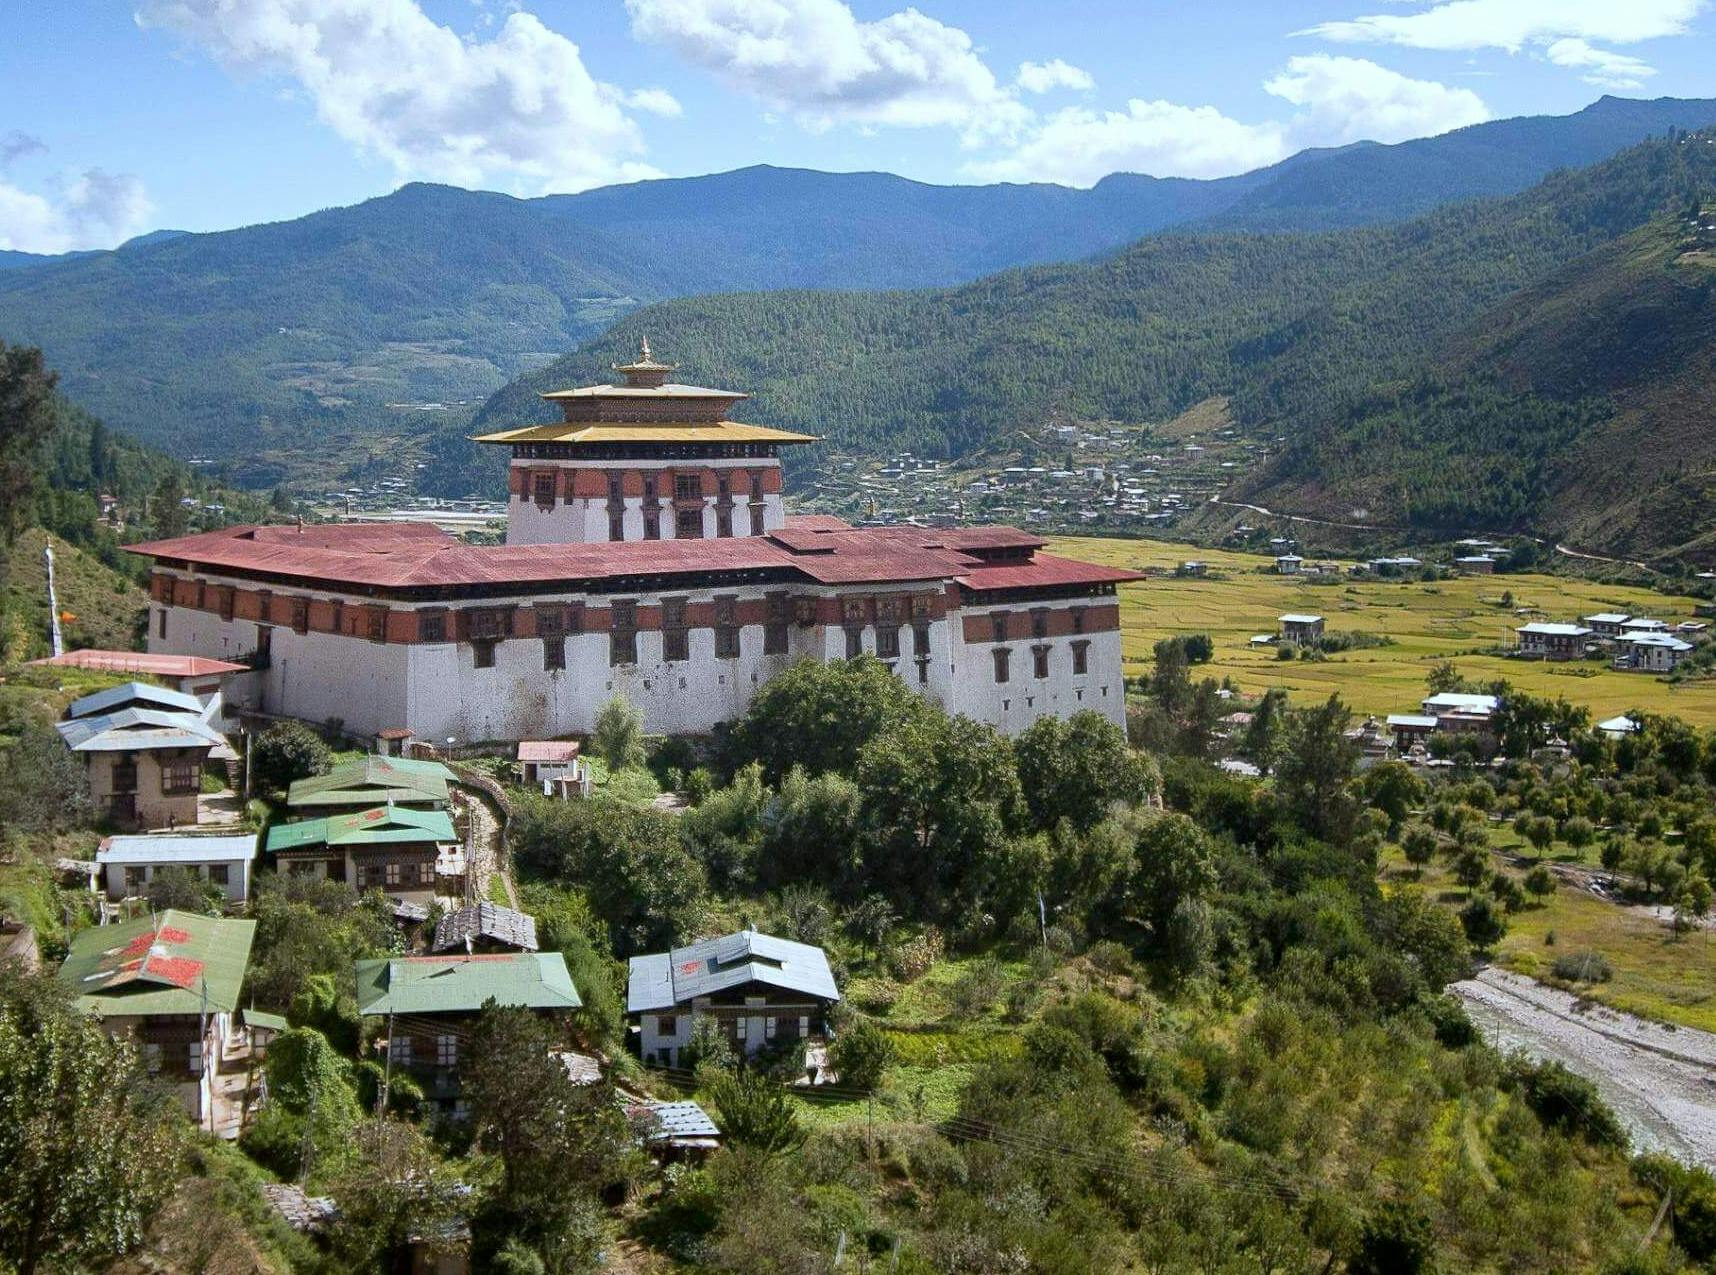 Things to see in Paro